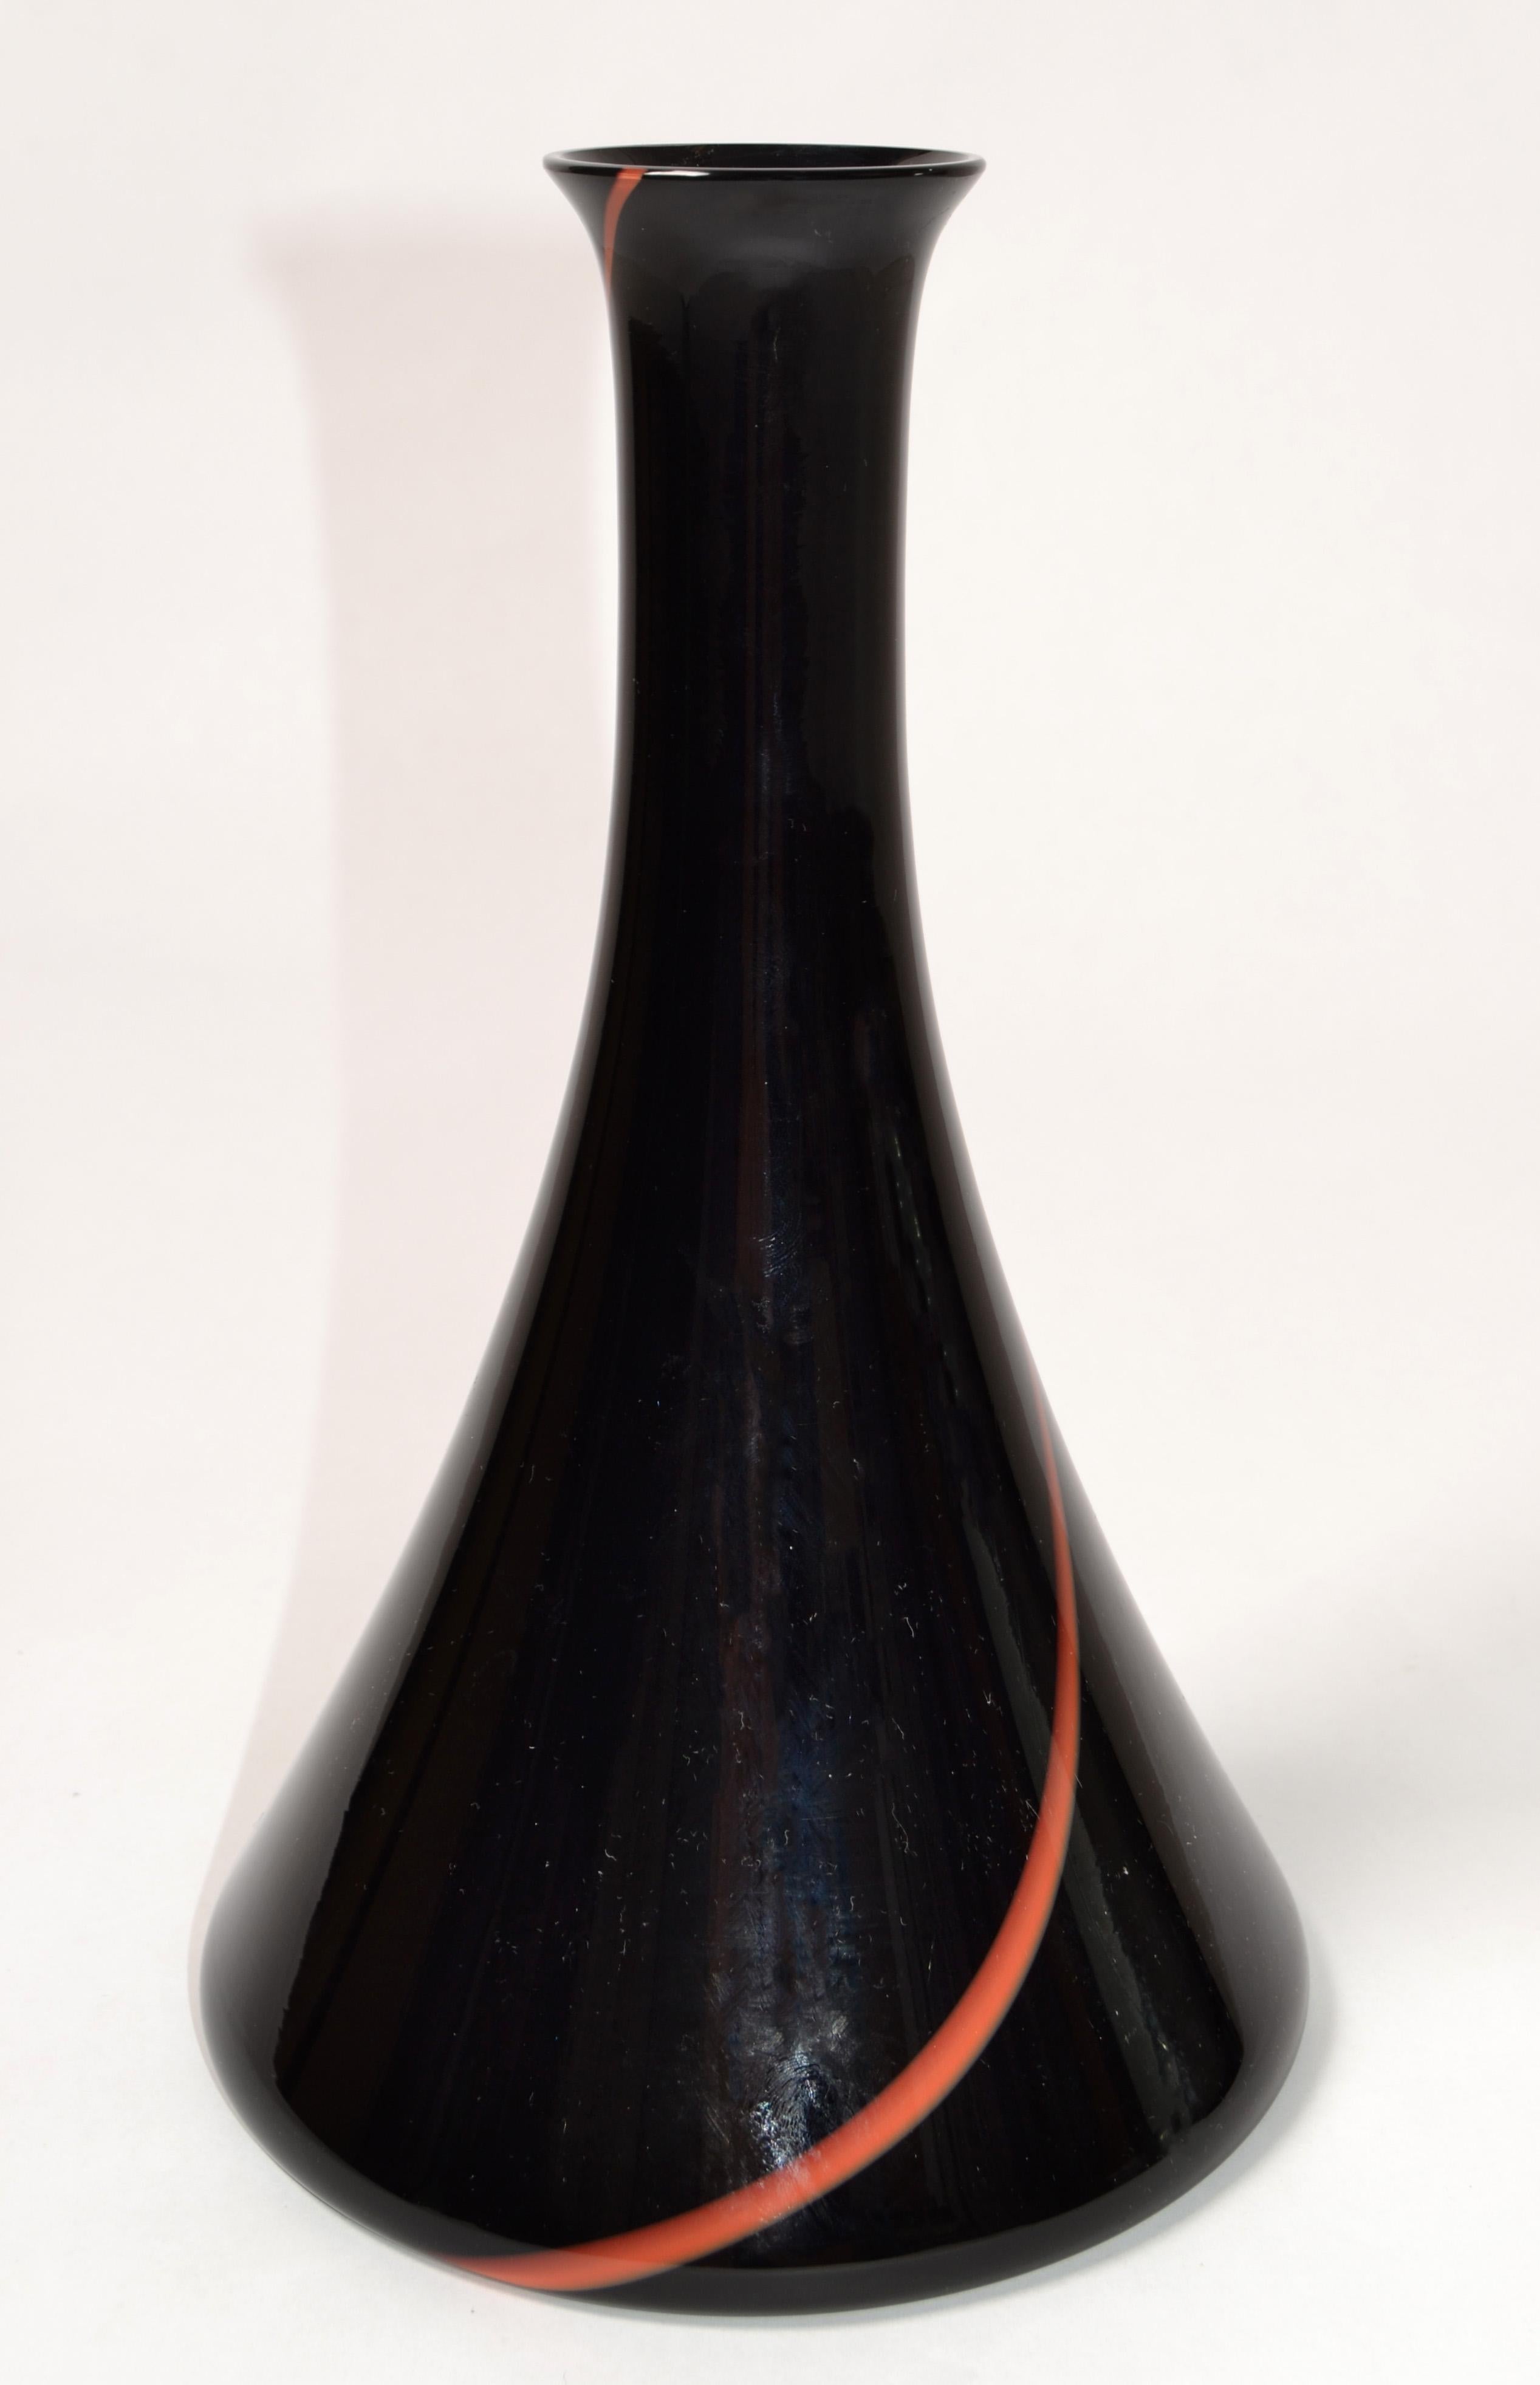 VeArt Italy, Mid-Century Modern swirl red and black Murano Art Glass vase in a tall cone round vessel shape.
Marked at the Top with a silver foil label and engraved at the base, Veart Venice.
The opening measures 1.5 inches in diameter.
A minimalism